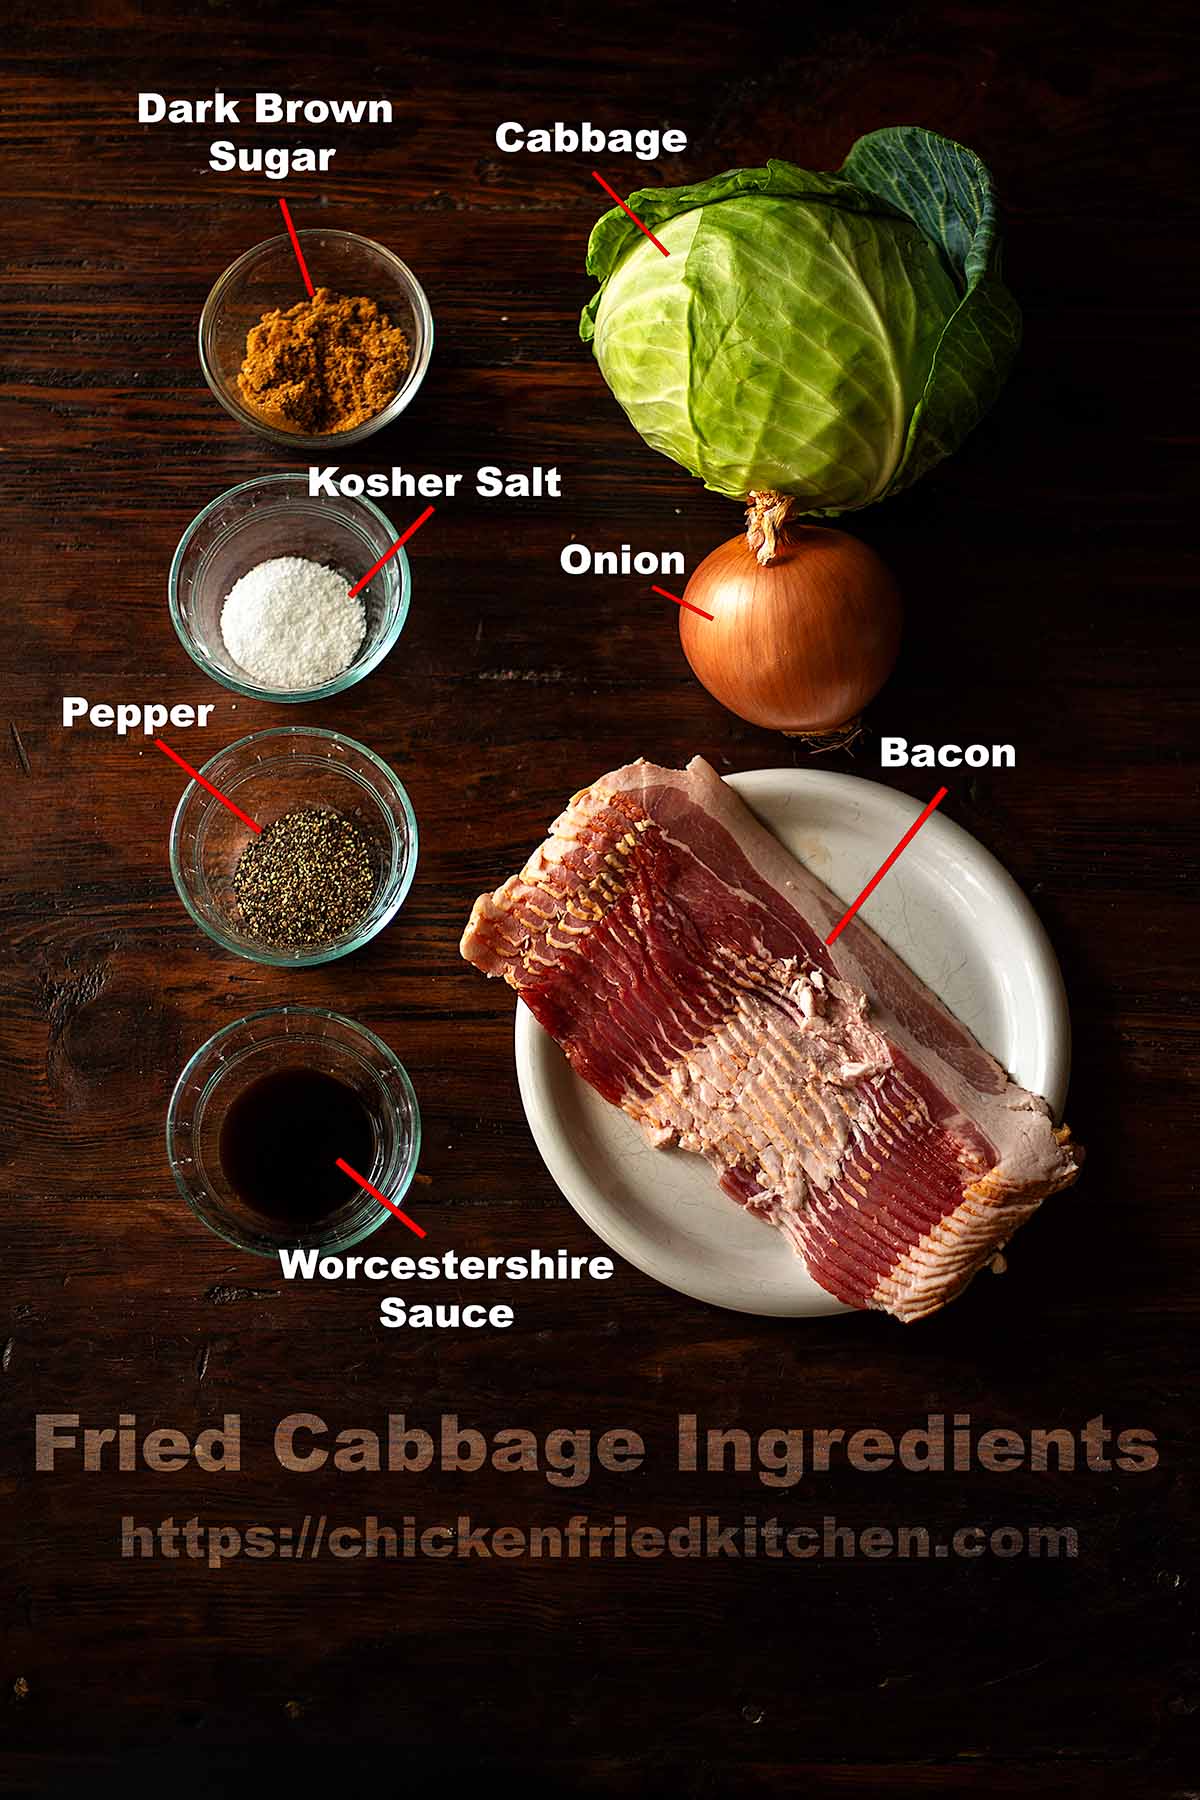 Fried cabbage ingredients labeled and laid out on a rustic wooden table.